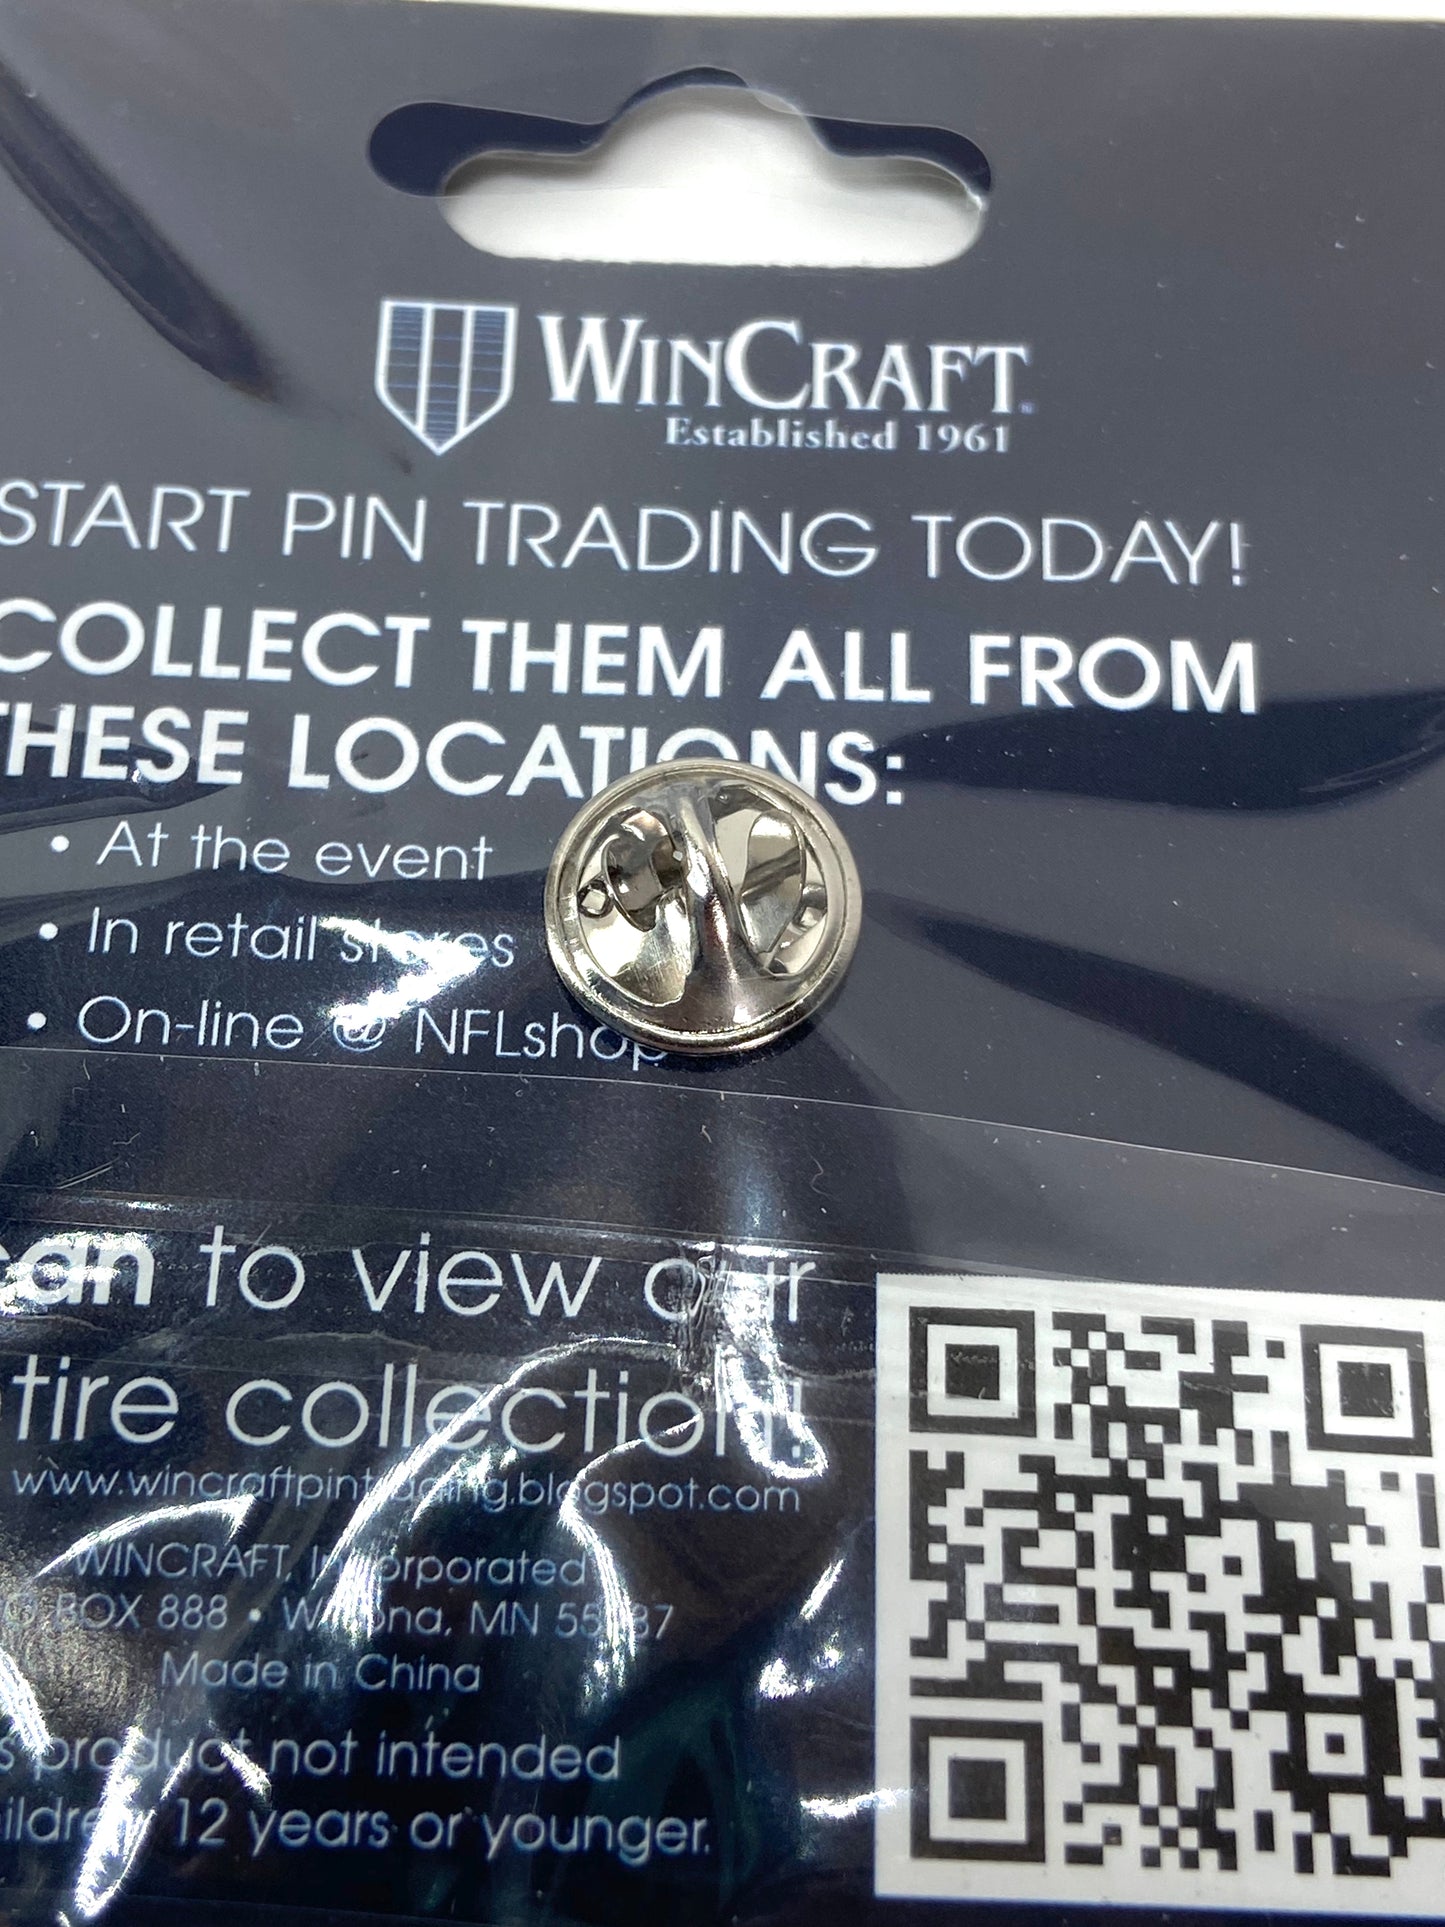 Super Bowl NFL Collectible Trading Pins by Wincraft